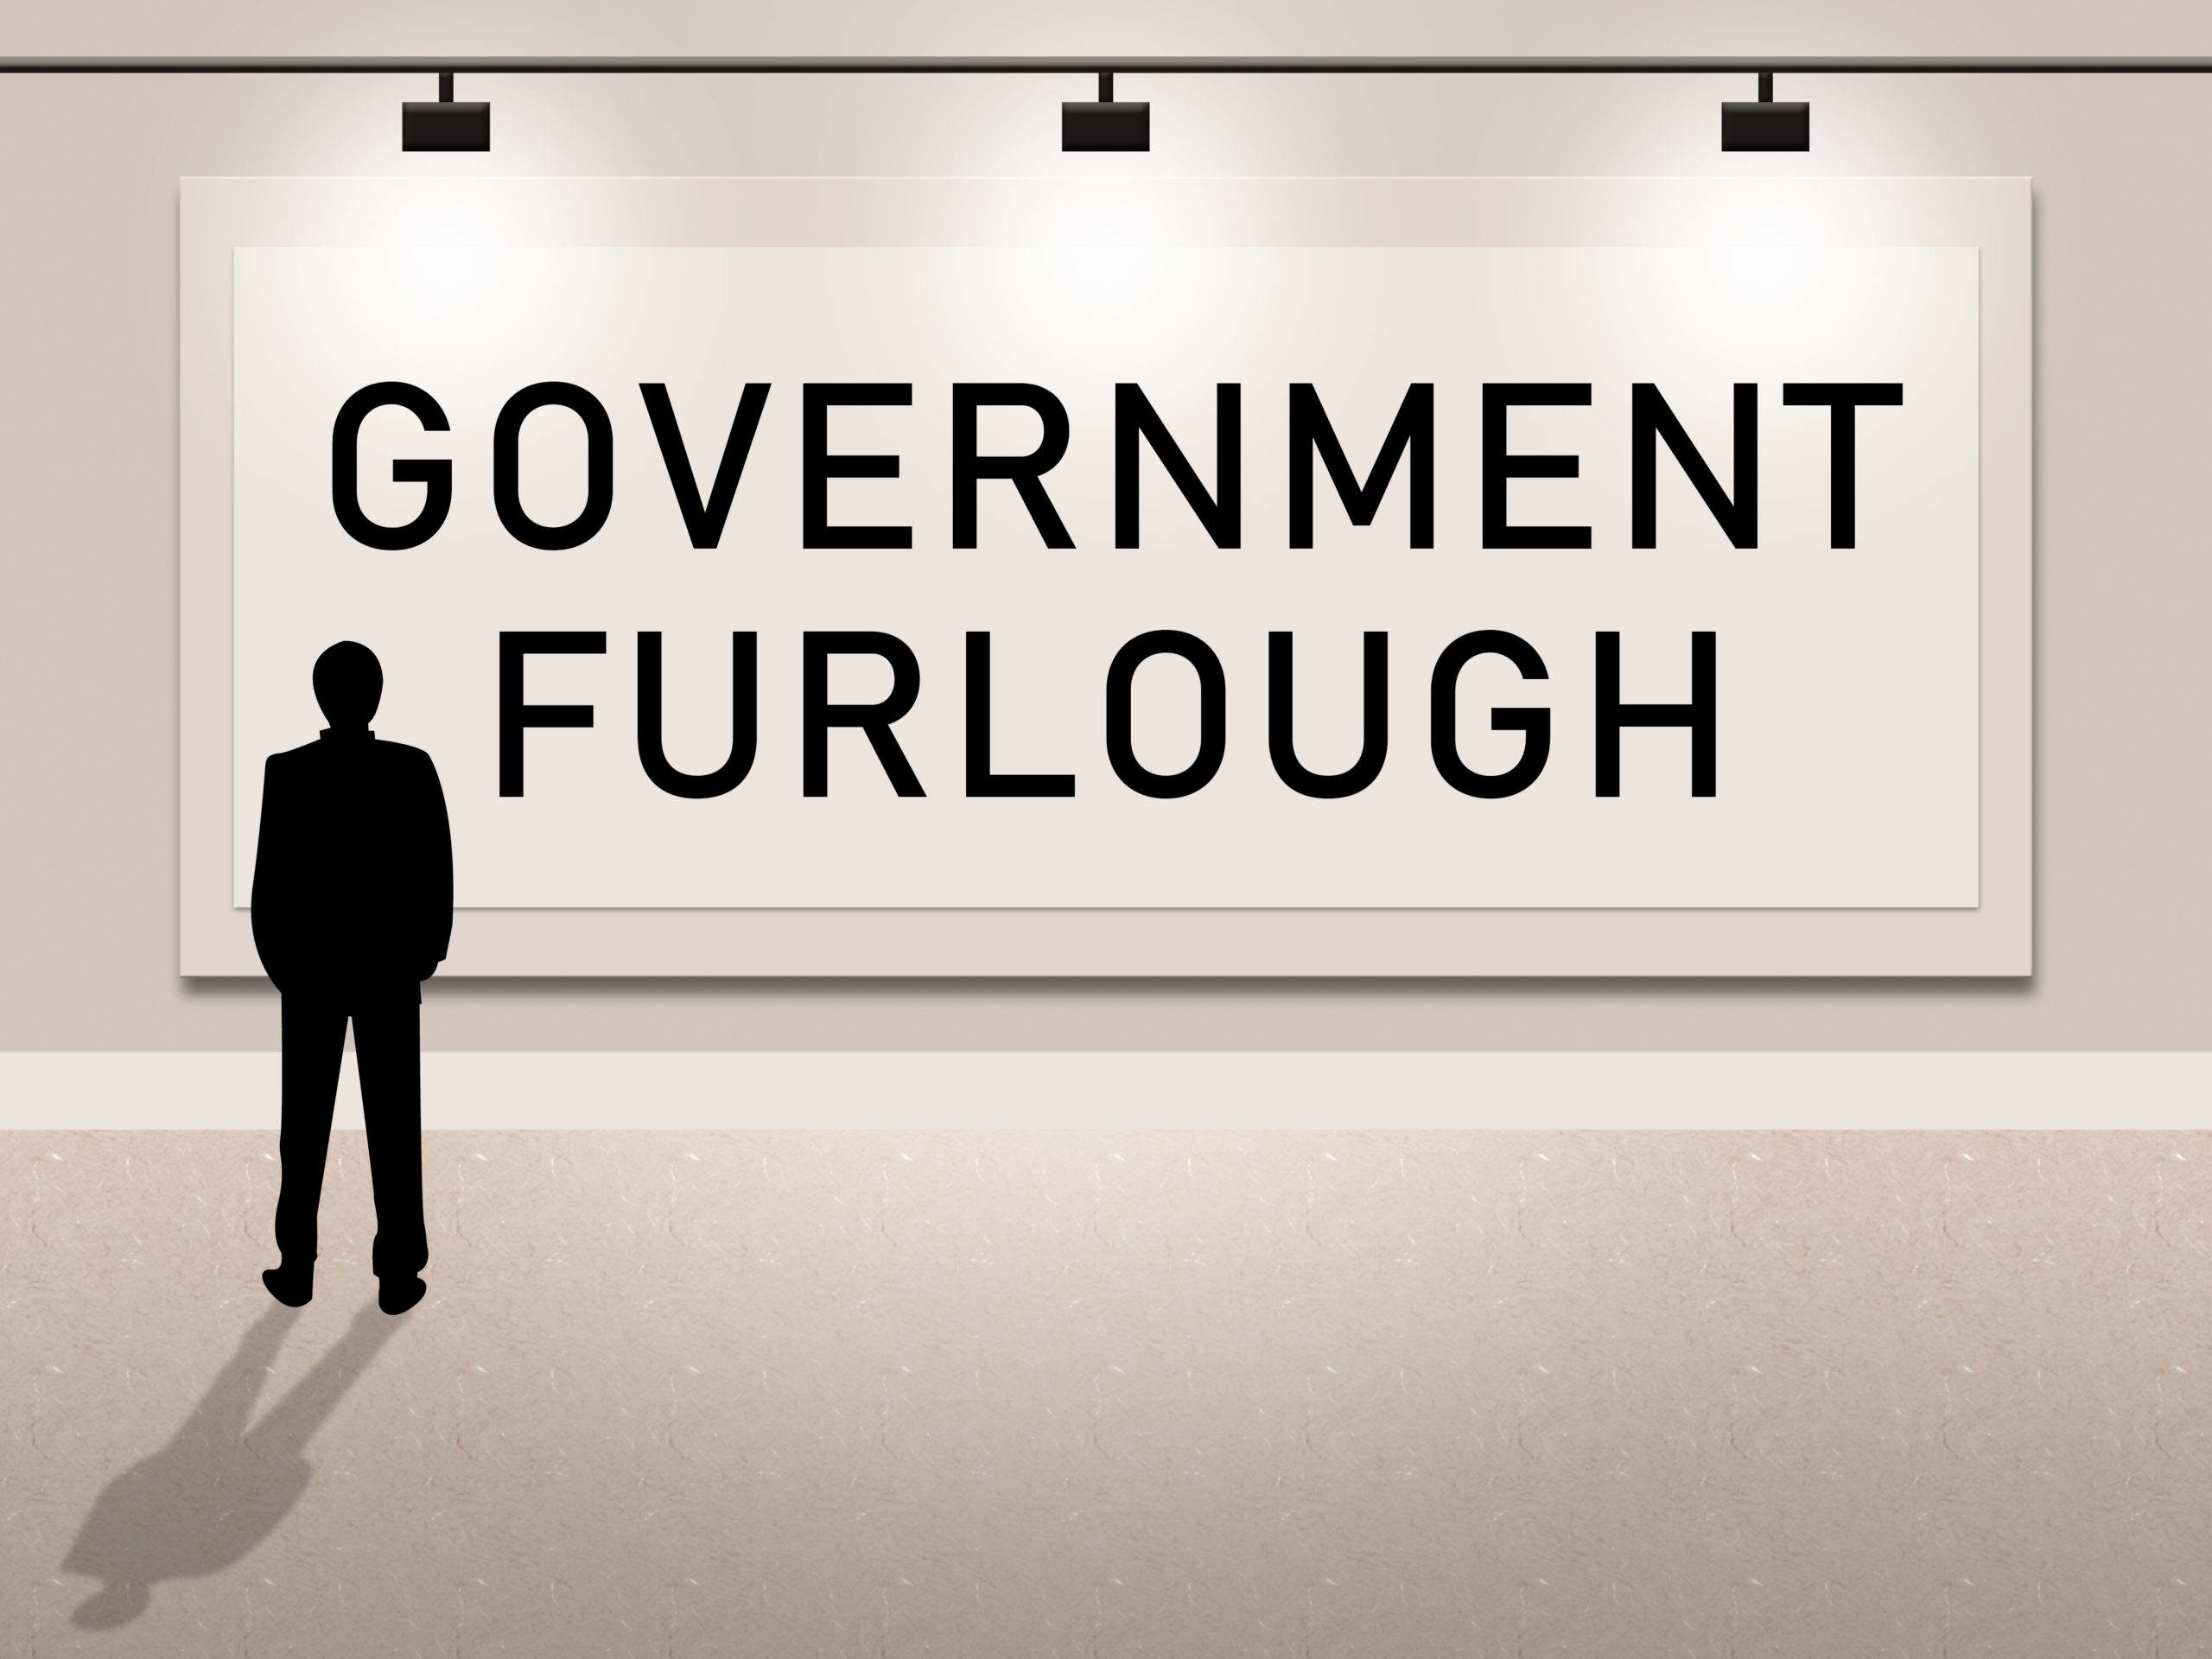 Government Furlough Sign Means Layoff For Federal Workers. National Shutdown From Washington - 3d Illustration